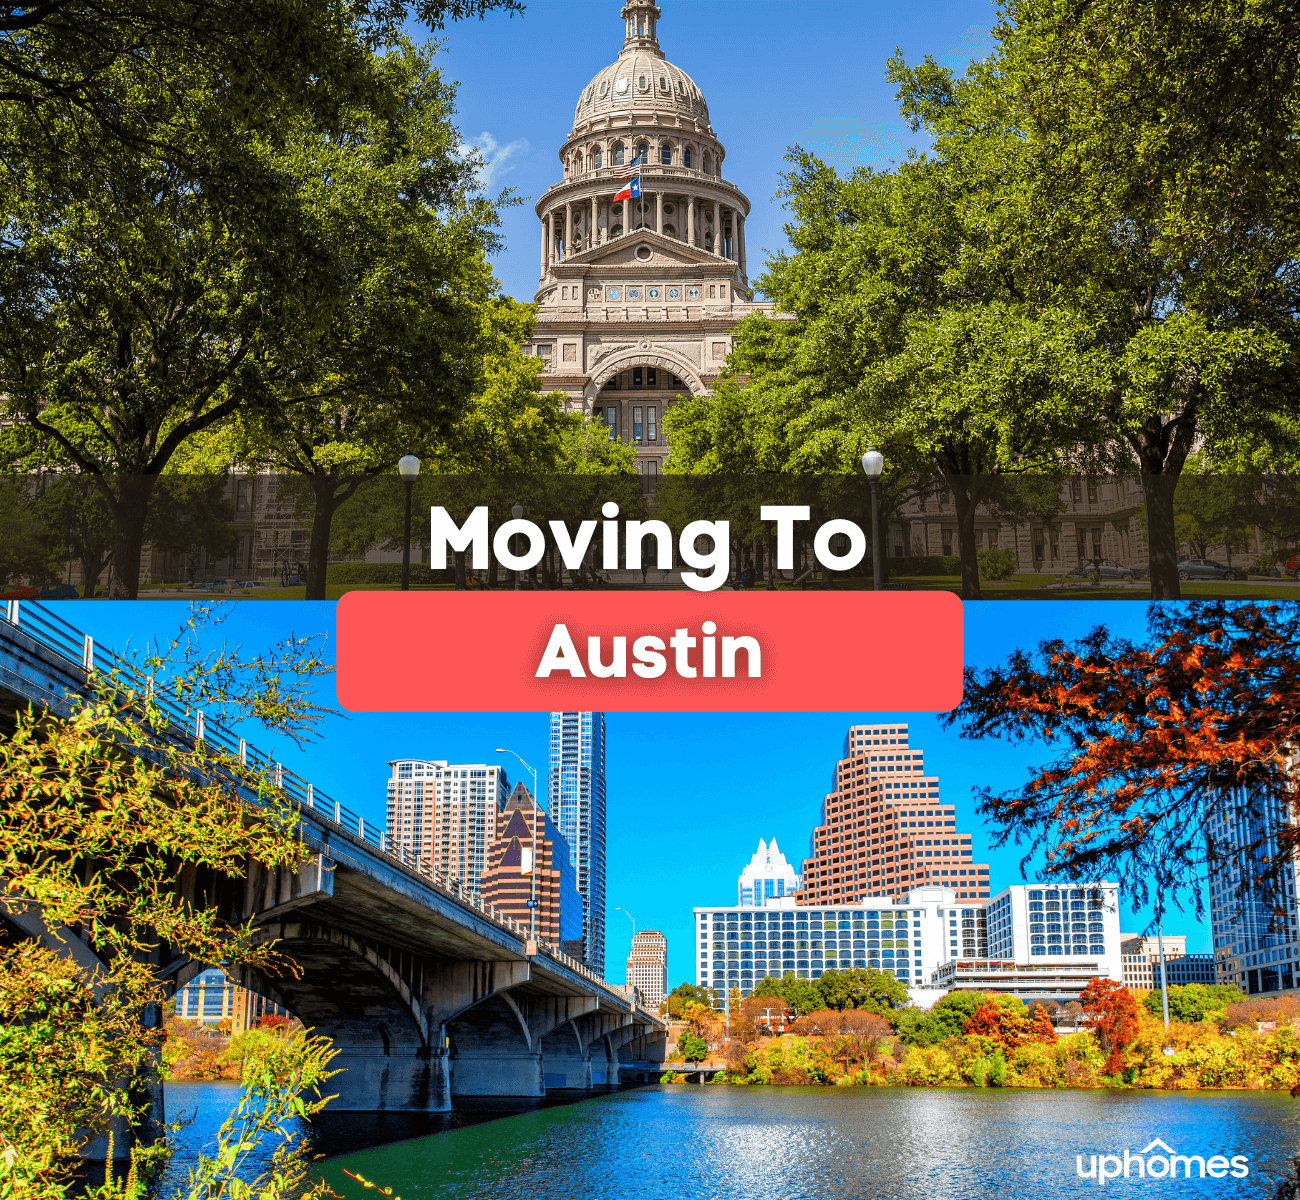 Moving to Austin, TX - What is it like living in Austin?